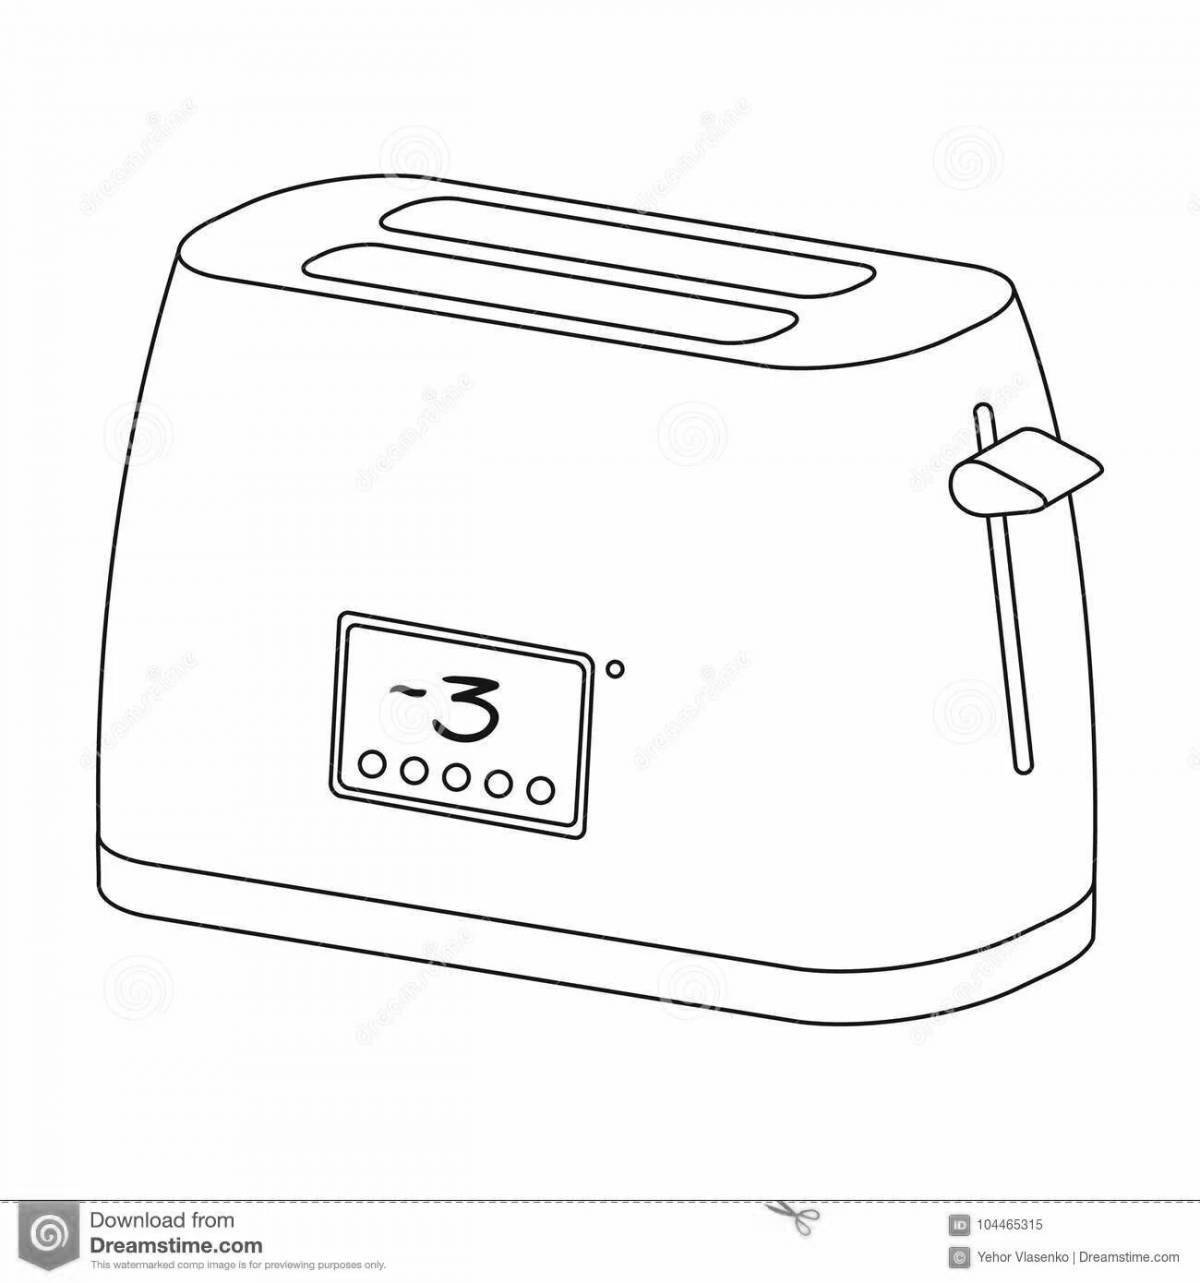 Colorful toaster coloring page